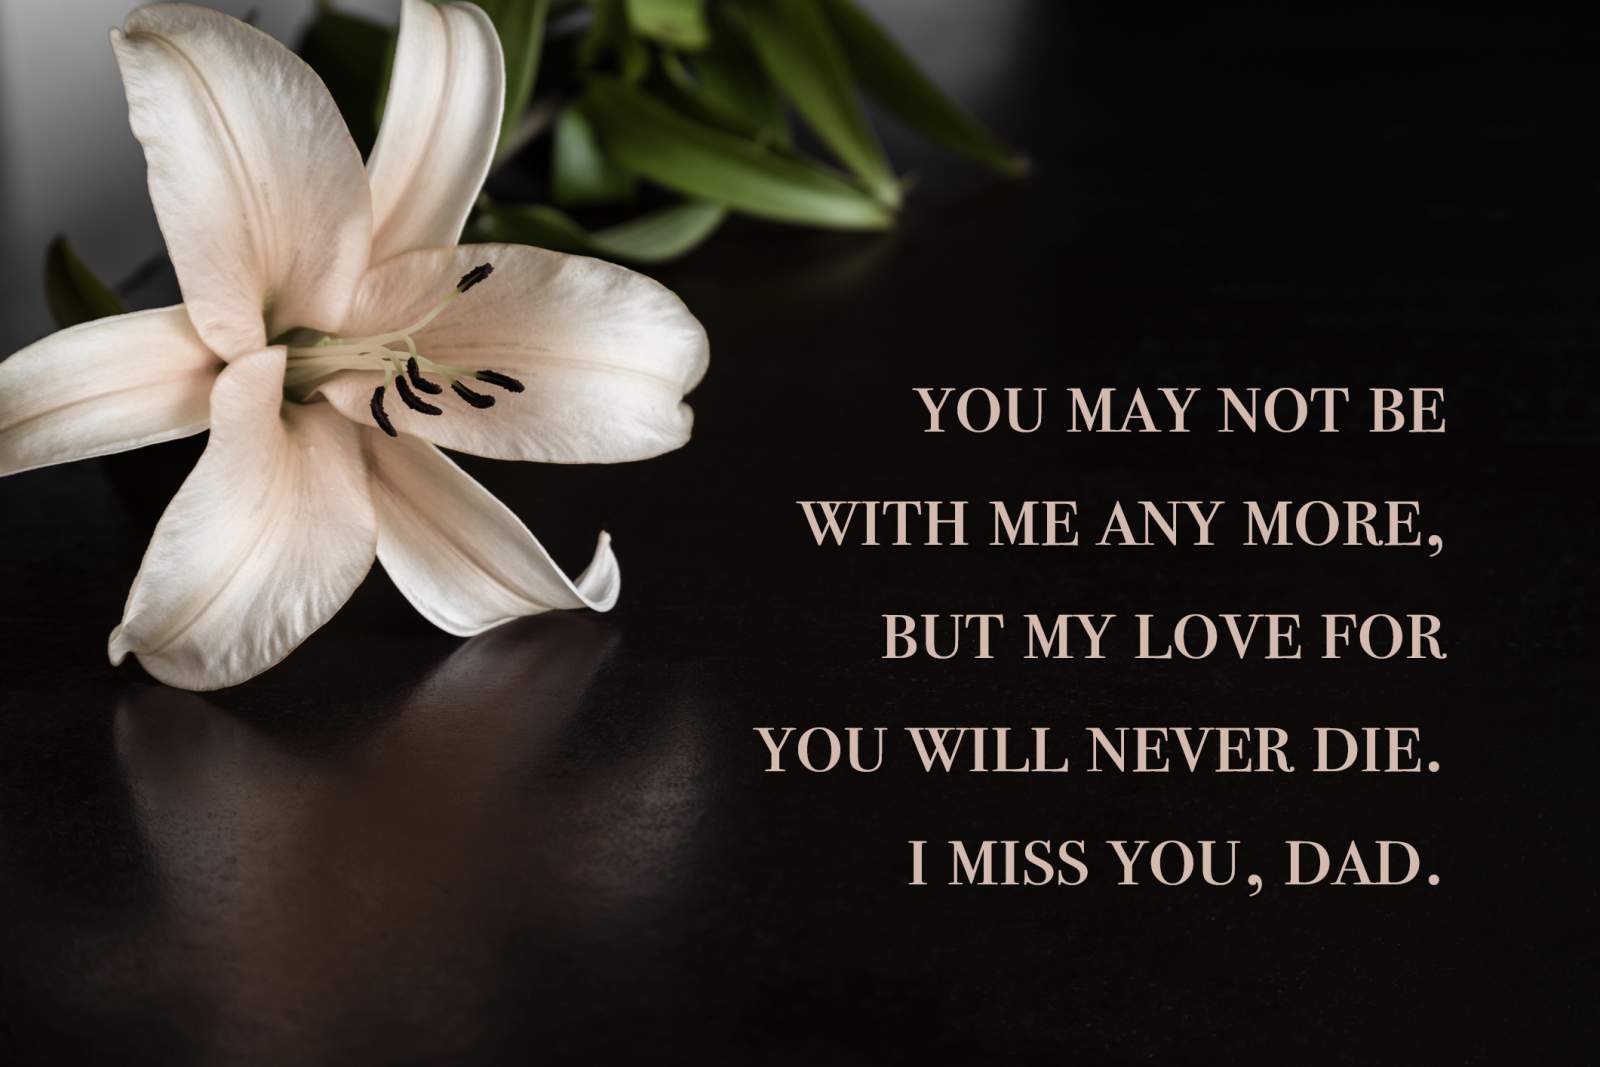 flowers with a miss you dad quote overlay